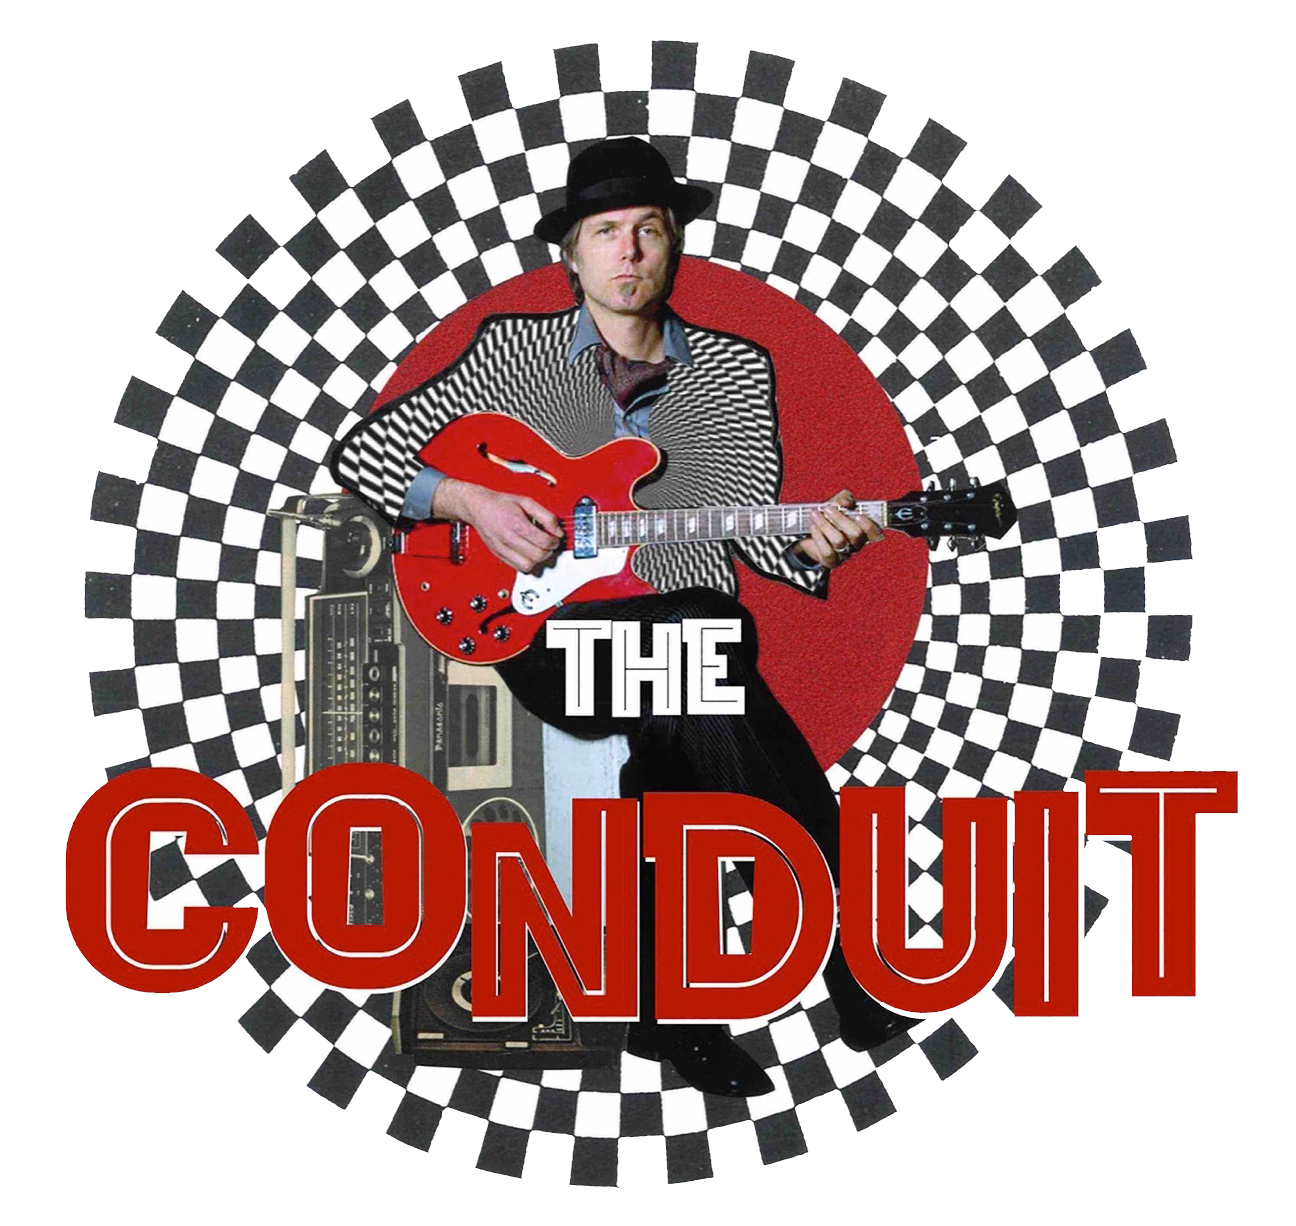 The Conduit Music Podcast